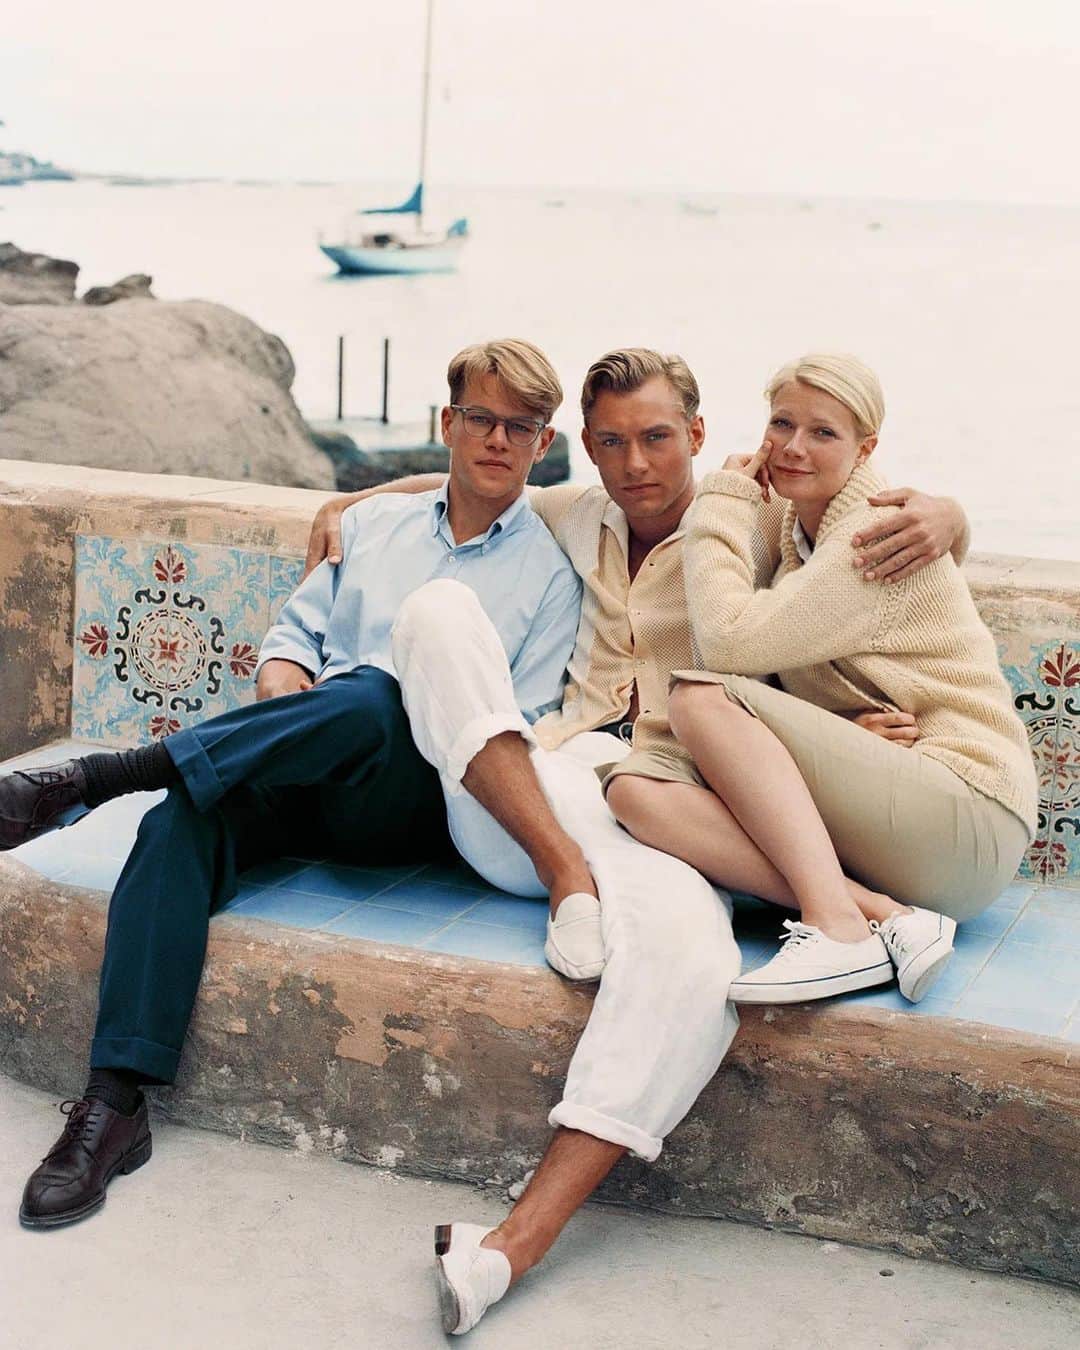 Vanity Fairのインスタグラム：「The first test screening for 'The Talented Mr. Ripley' was, as producer William Horberg remembers it, “a total disaster.” But the 1999 film, which included Matt Damon, Gwyneth Paltrow, and Jude Law at the peak of their star power, would ultimately become an Oscar anomaly and touchstone.  “Our actors had been catapulted into a level of stardom that they did not have when we shot the movie, so the audience was coming with a whole different lens of expectation,” Horberg says. “Matt Damon, @GwynethPaltrow, the director of The English Patient—it all seemed to promise an epic love story.” 'Ripley' delivered the furthest thing from that, of course.   In honor of the film's 25th anniversary, VF's David Canfield pays tribute to the thriller that was frank, queer, and ahead of its time. Read more at the link in bio.   Photograph from Pamela Hanson/Trunk Archive」